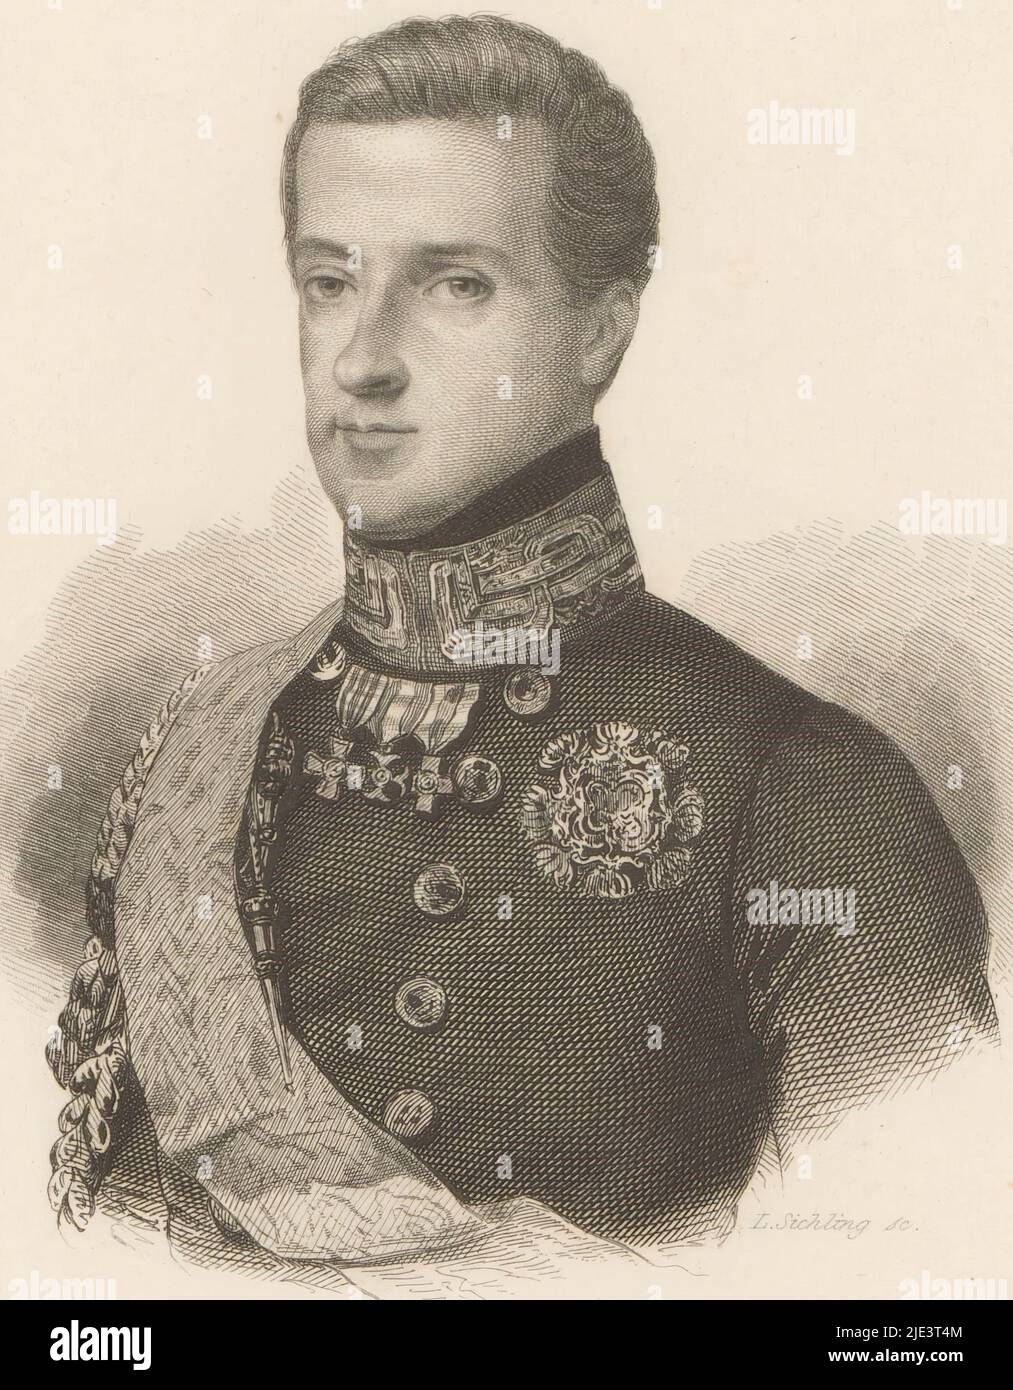 Portrait of Charles Albert, King of Sardinia, print maker: Lazarus Gottlieb Sichling, (mentioned on object), 1822 - 1863, paper, steel engraving, h 290 mm - w 226 mm Stock Photo